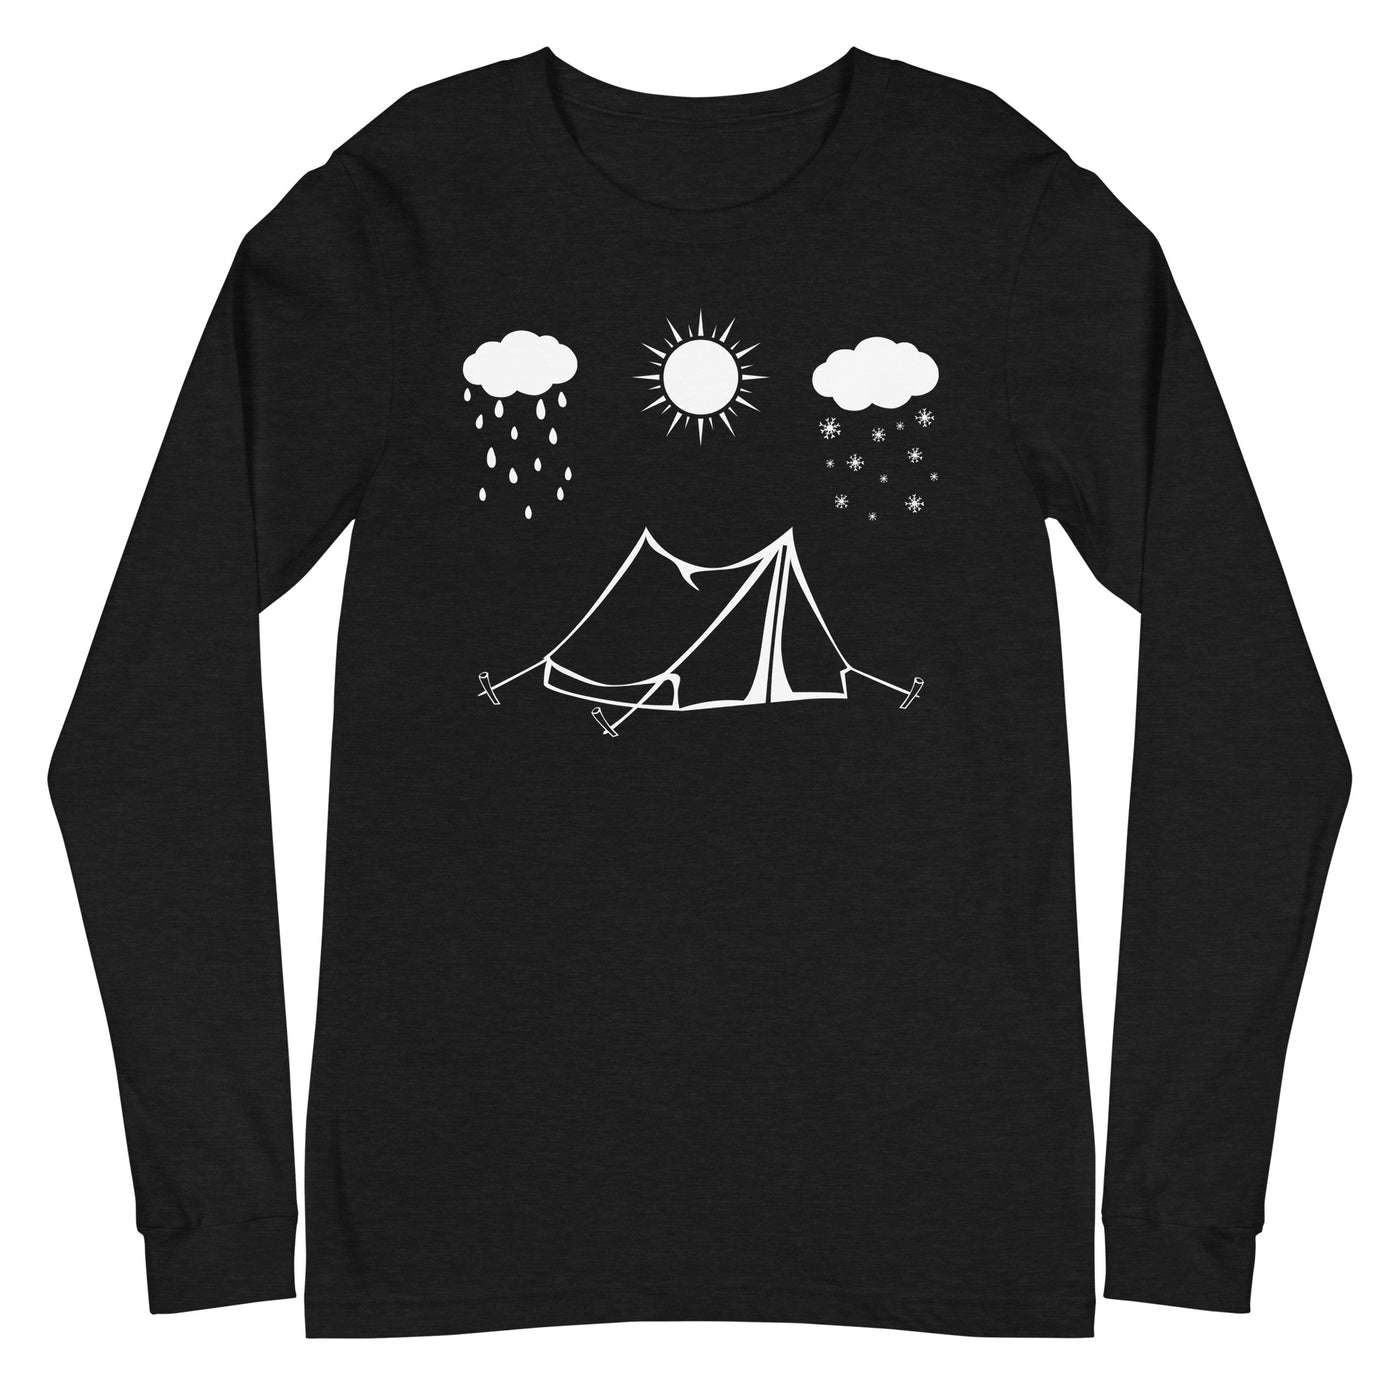 All Seasons And Camping - Longsleeve (Unisex) camping Black Heather